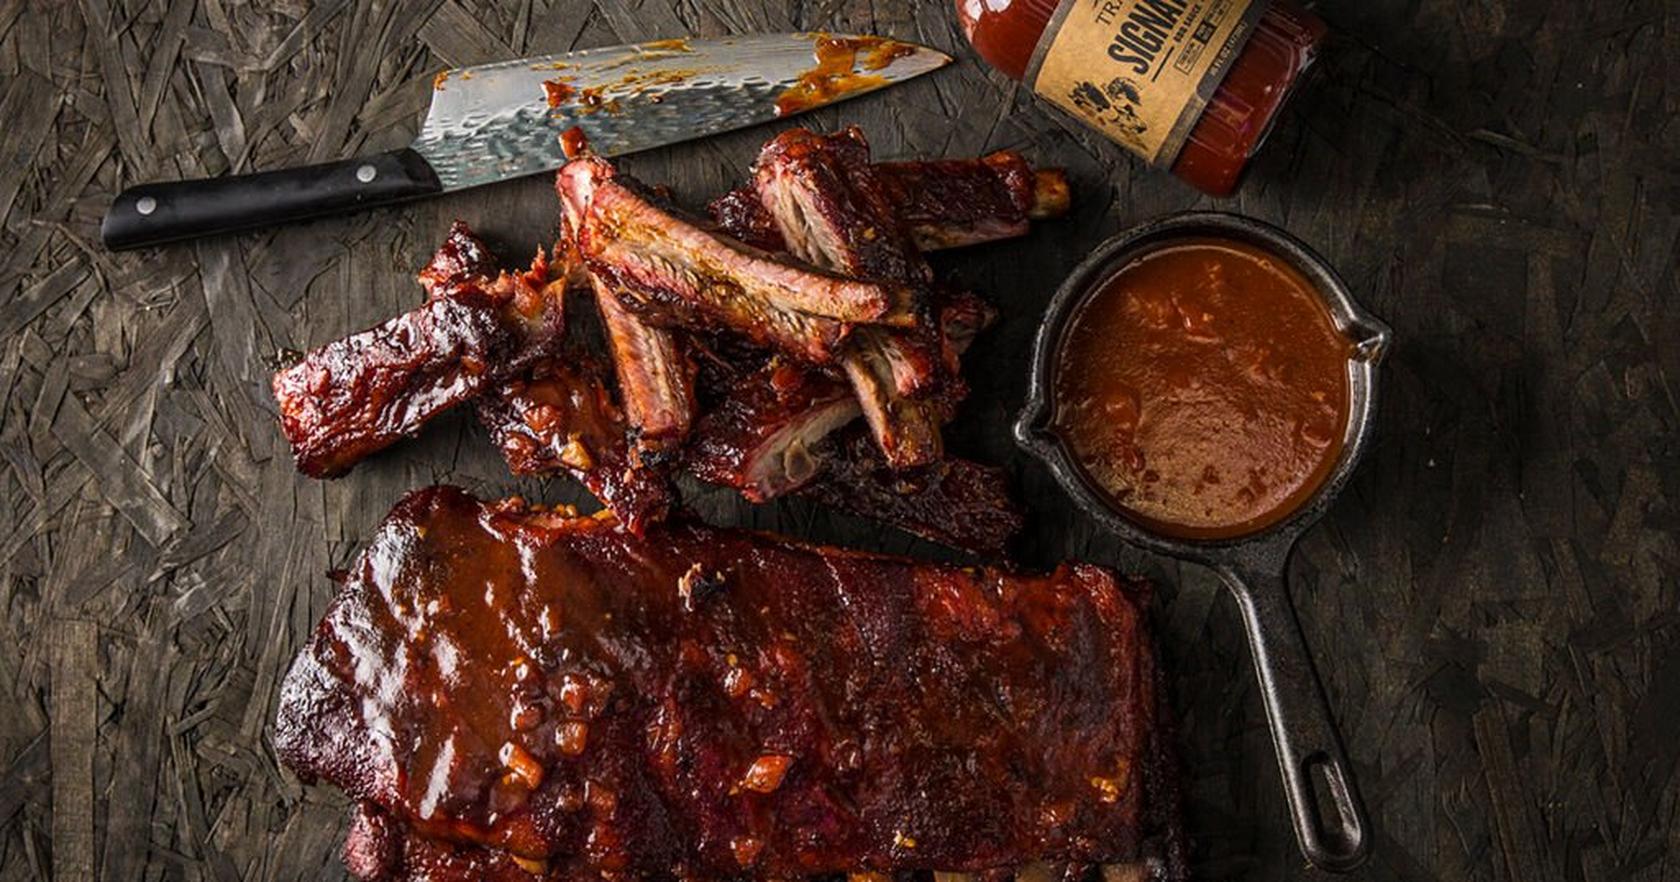 image of Smoked Ribs with Coconut Rum BBQ Sauce